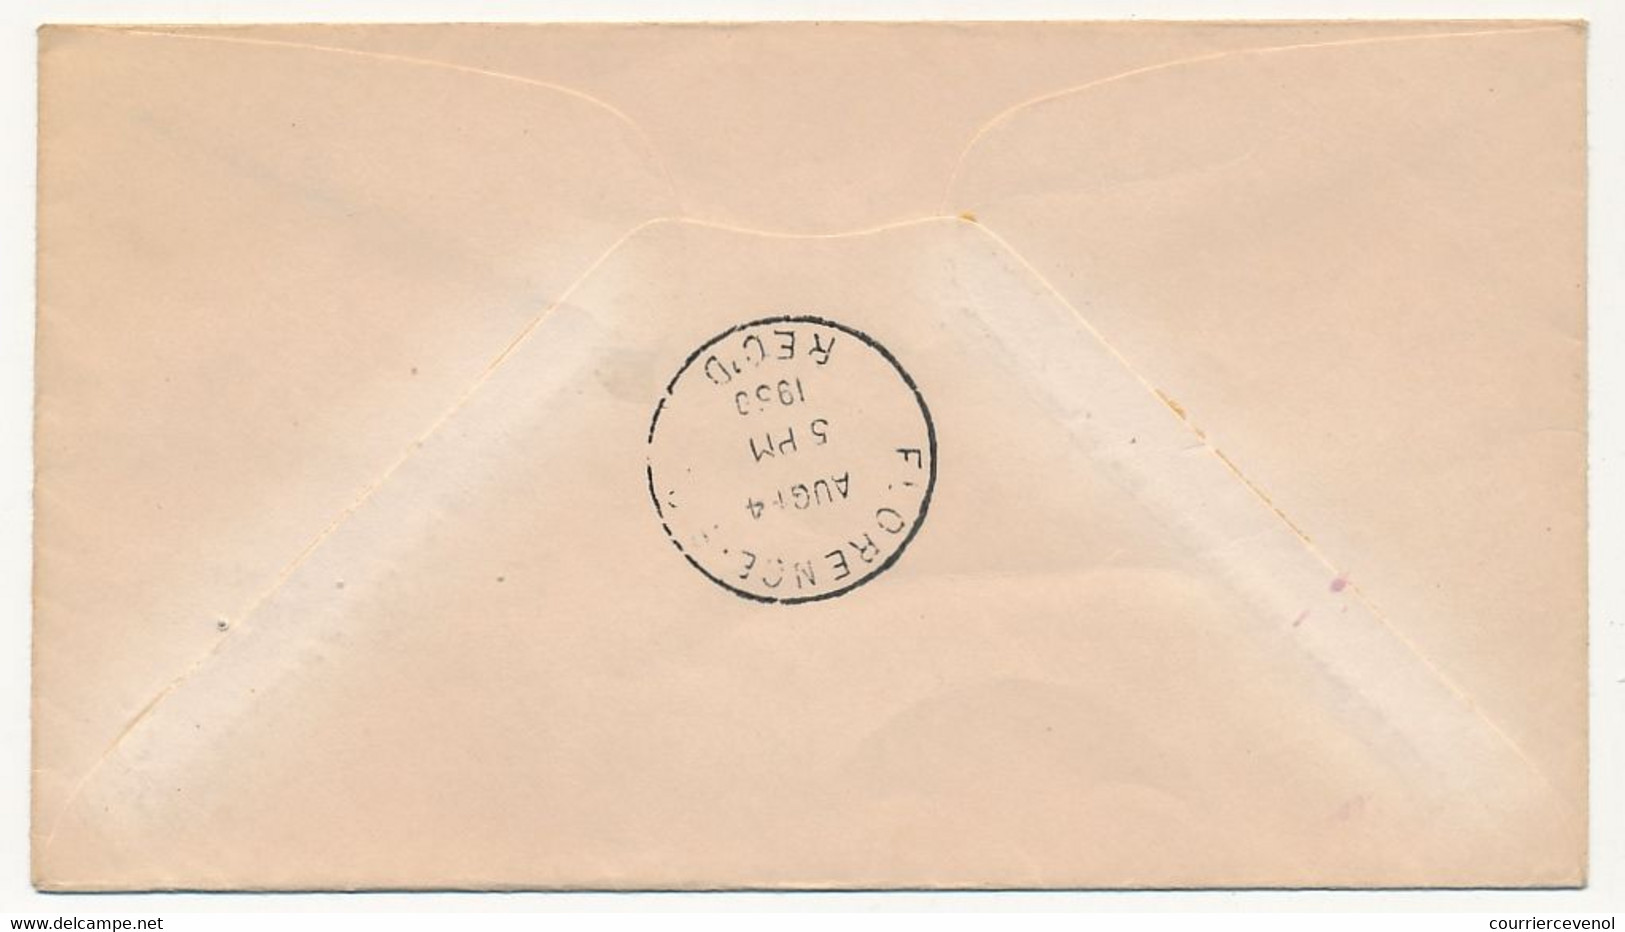 Etats Unis - First Trip Highway Post Office - FAYETTEVILLE, N.C. & FLORENCE, S.C. - 14 Aout 1950 - Cartas & Documentos